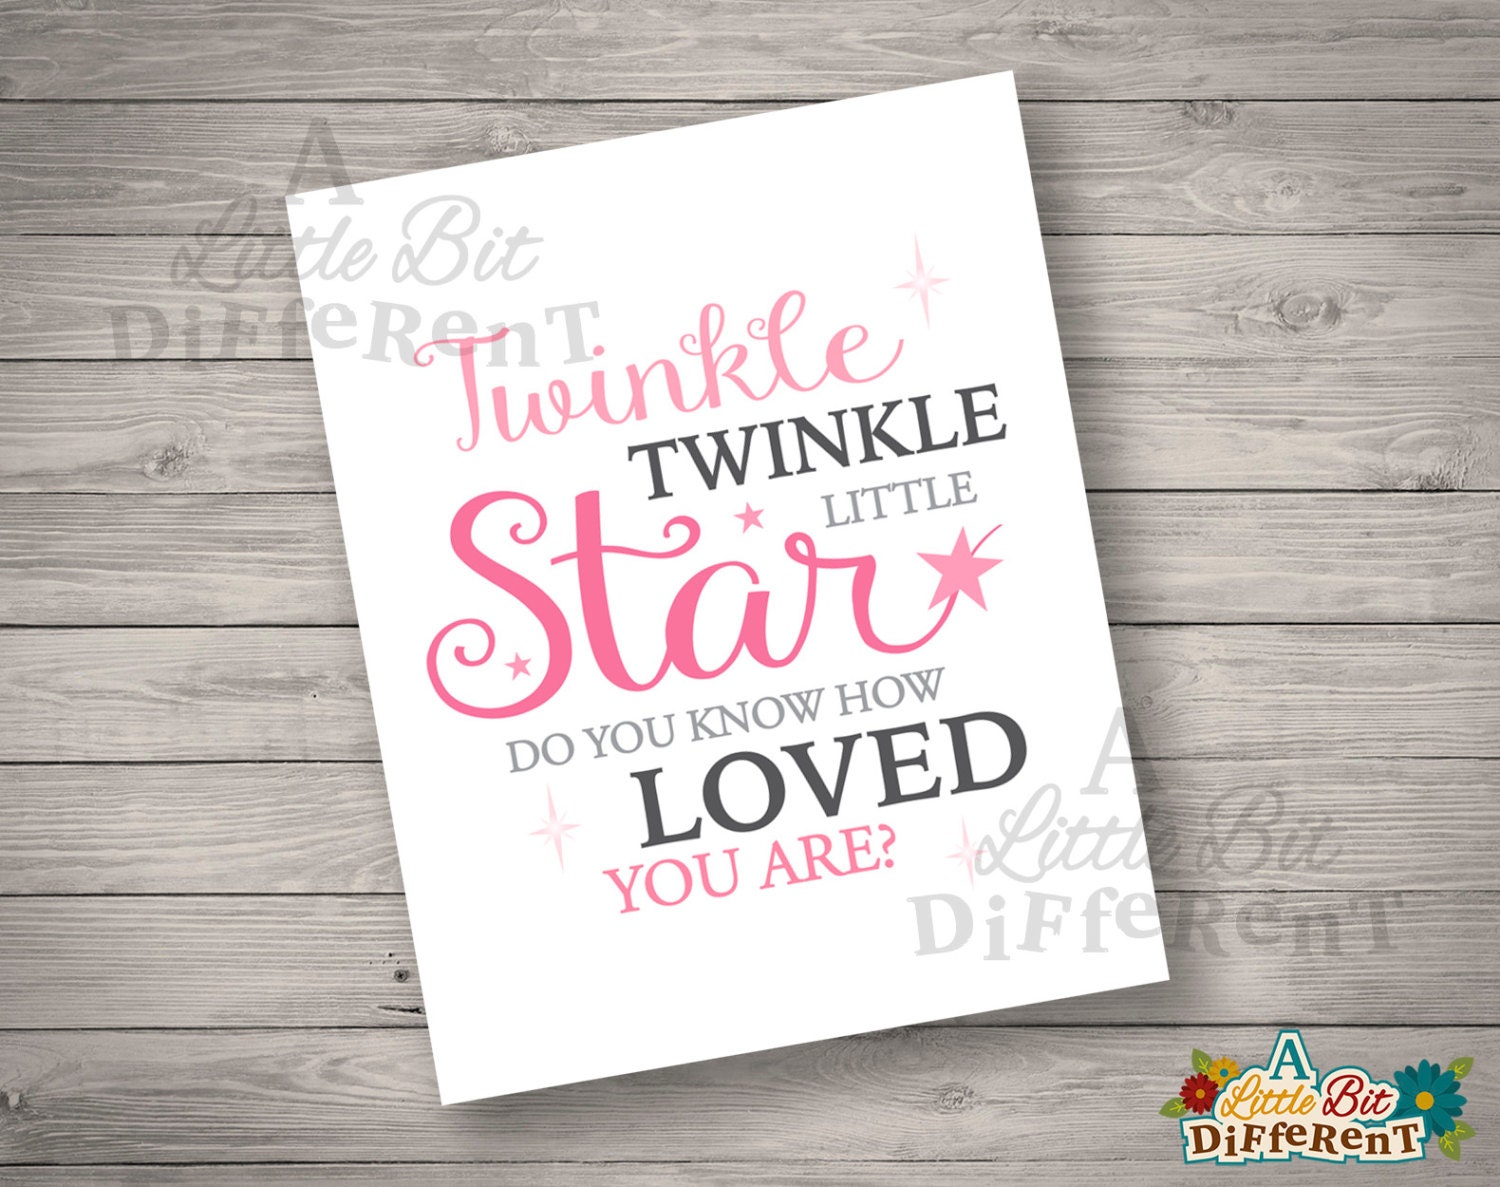 Twinkle twinkle little star do you know how loved you are | Etsy